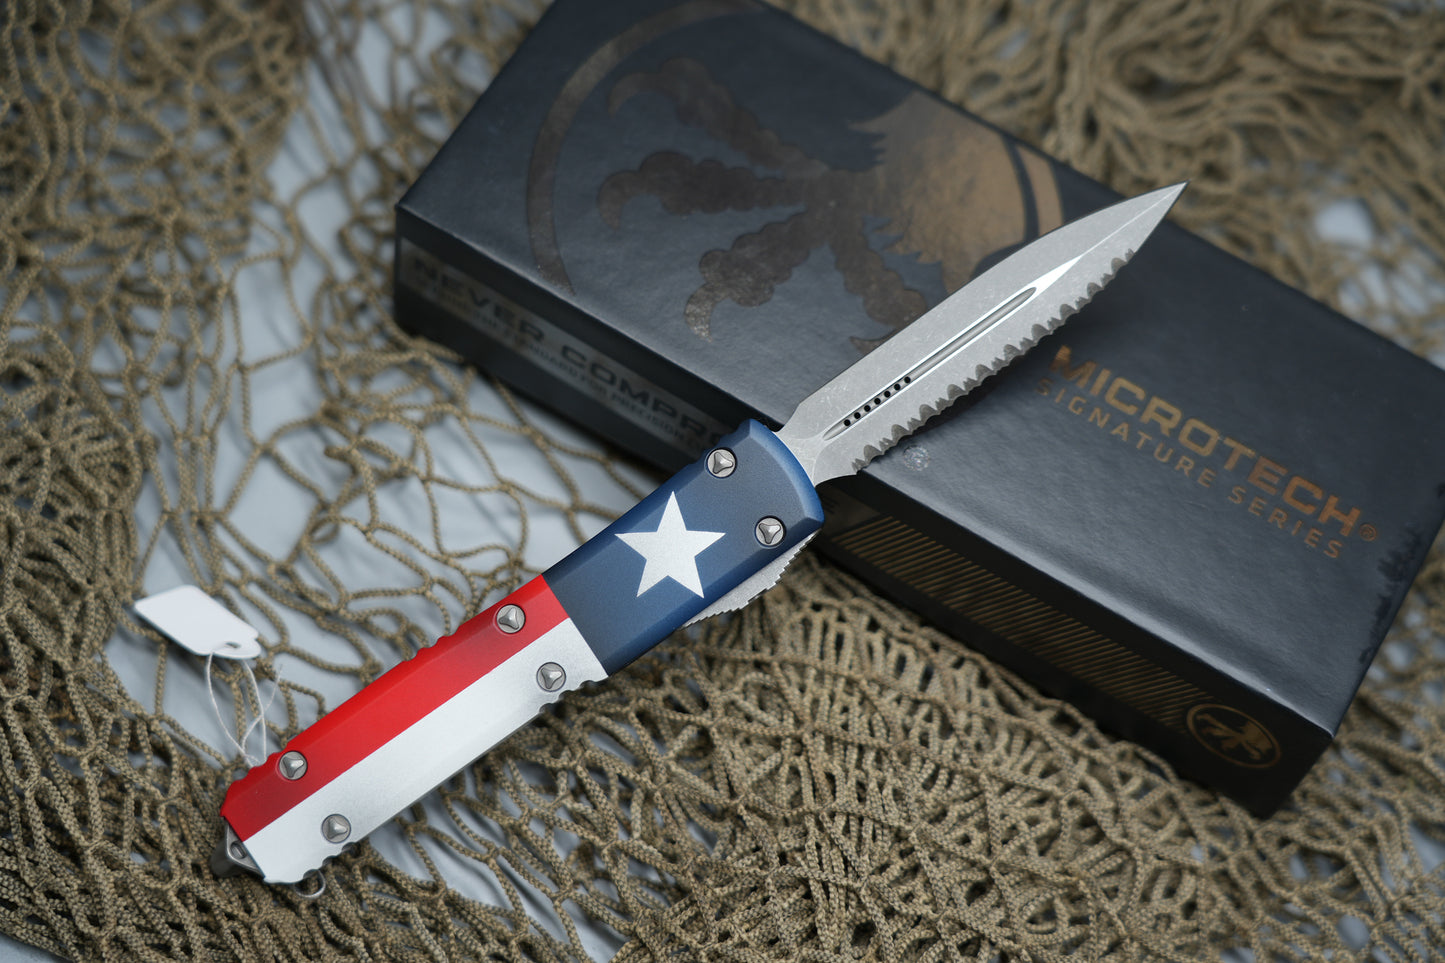 Microtech Texas Blade Show limited